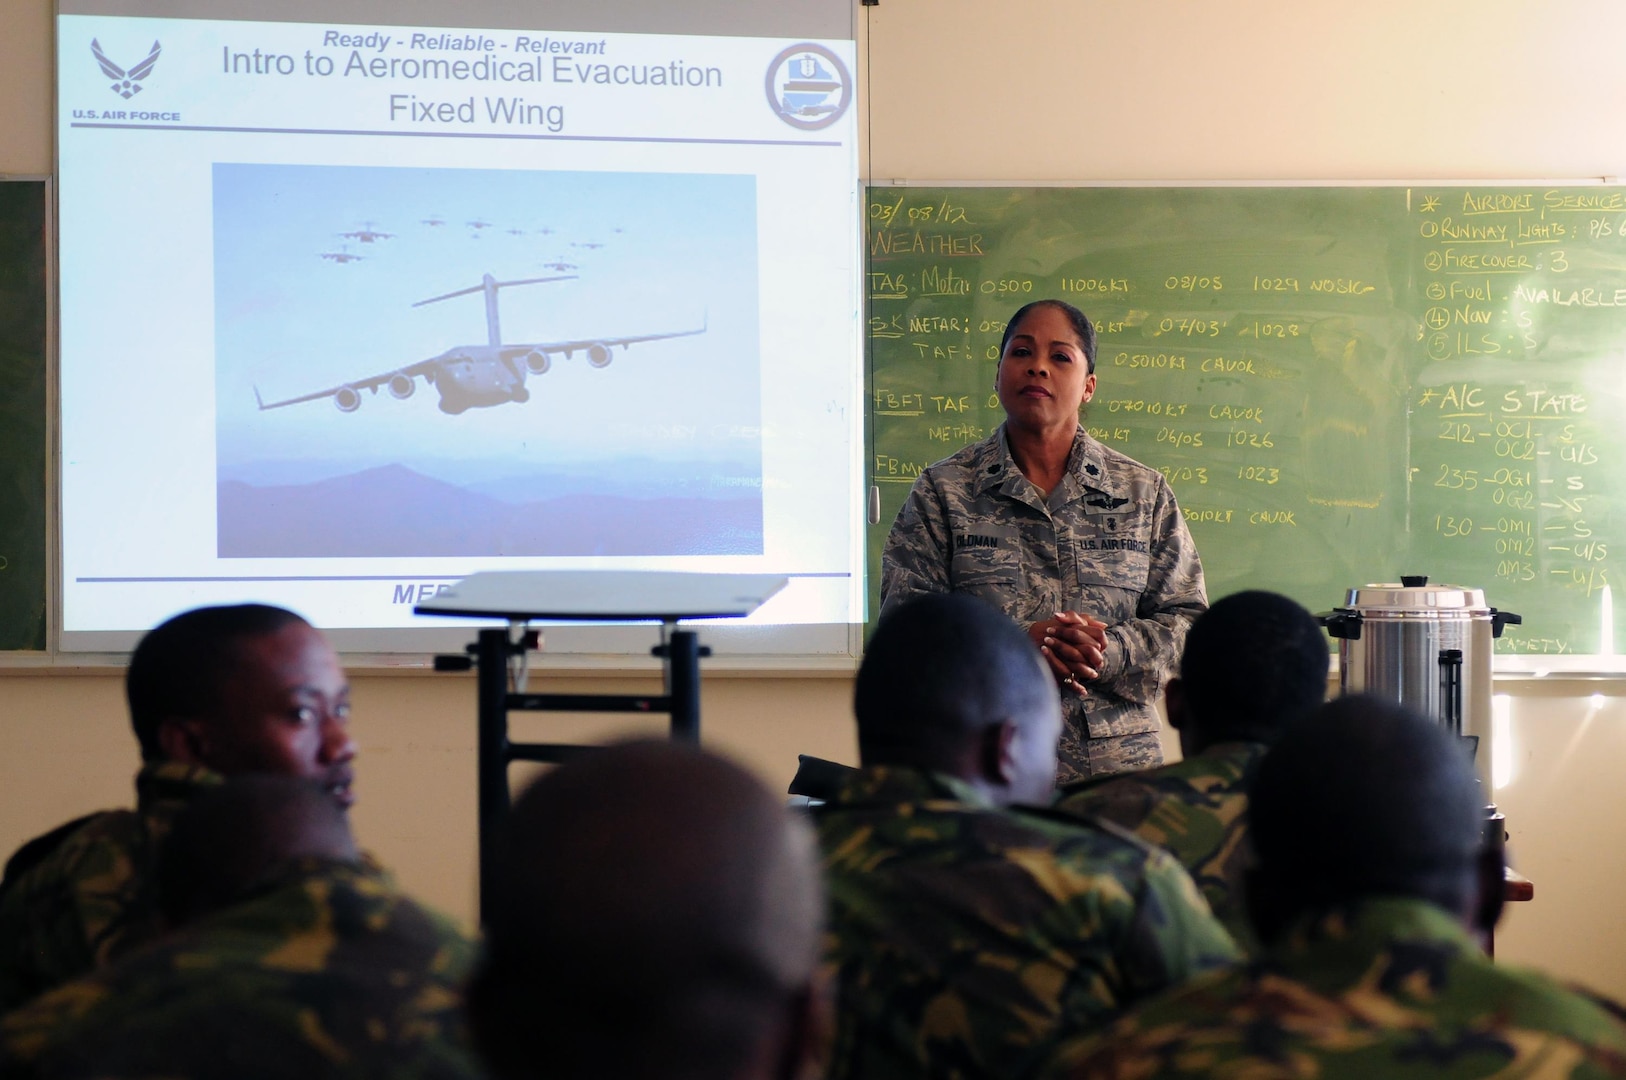 Air National Guard Lt. Col. June Oldman speaks to members of the Botswana defense force prior to classroom instruction at Thebephatswa Air Base, Botswana, for the start of MEDLITE 12, Aug. 6, 2012. MEDLITE 12 is a joint exercise between U.S. and Botswana aimed to establish and develop military interoperability, regional partnership and to synchronize capacity-building. Oldman is the MEDLITE 12 mission director.